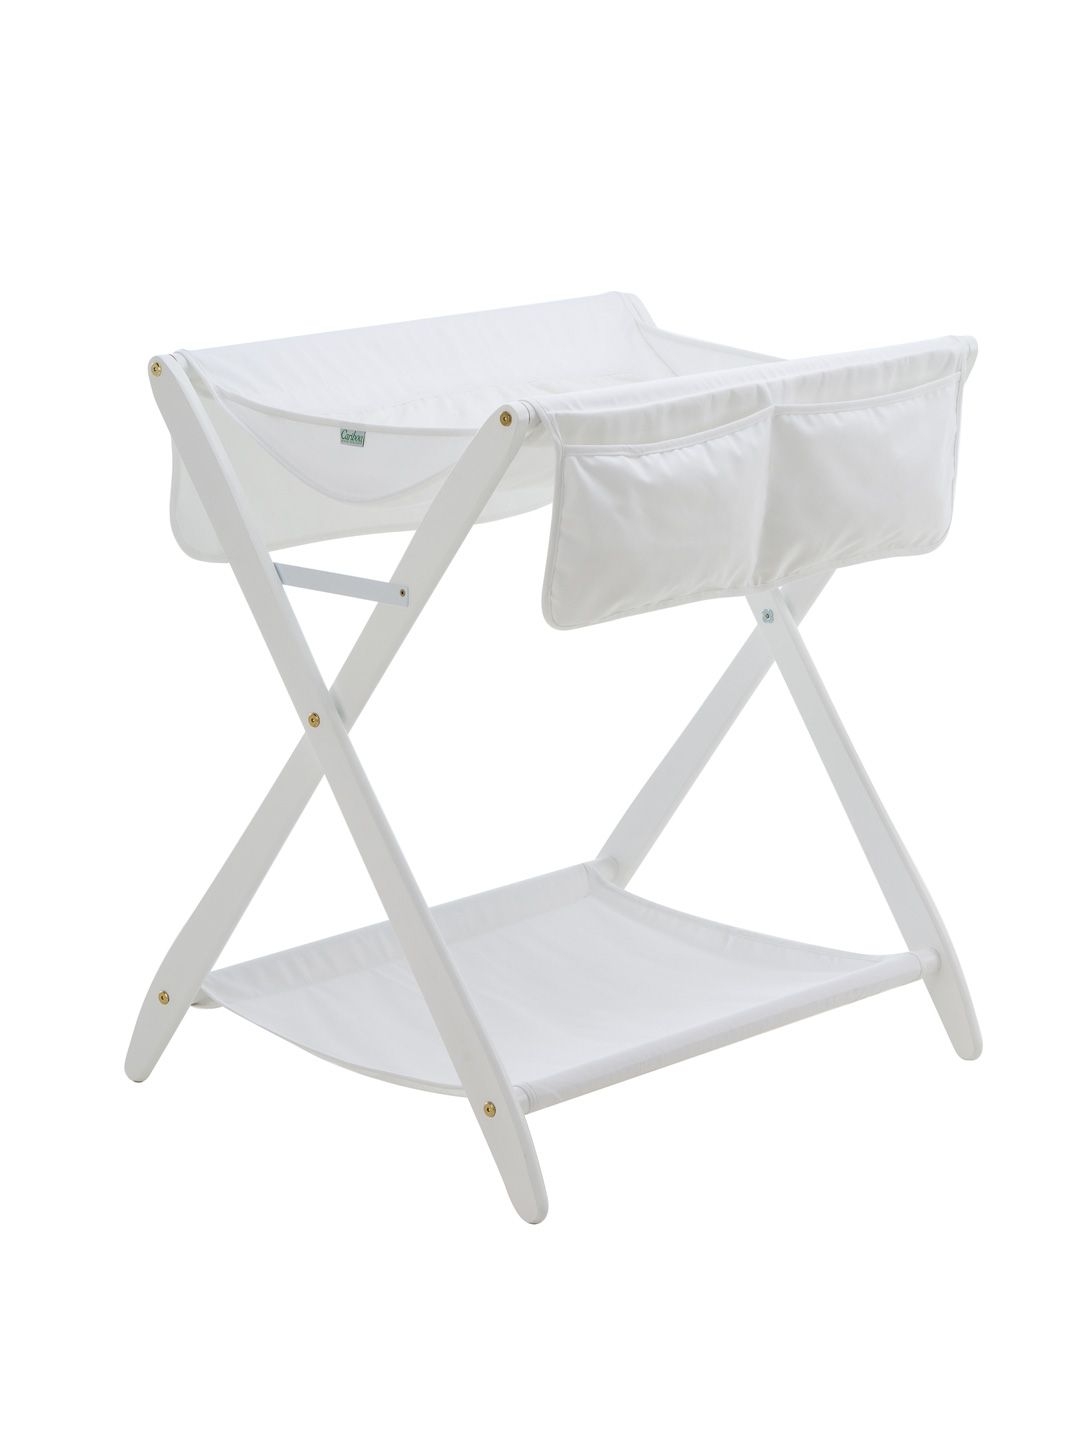 Collapsible changing table